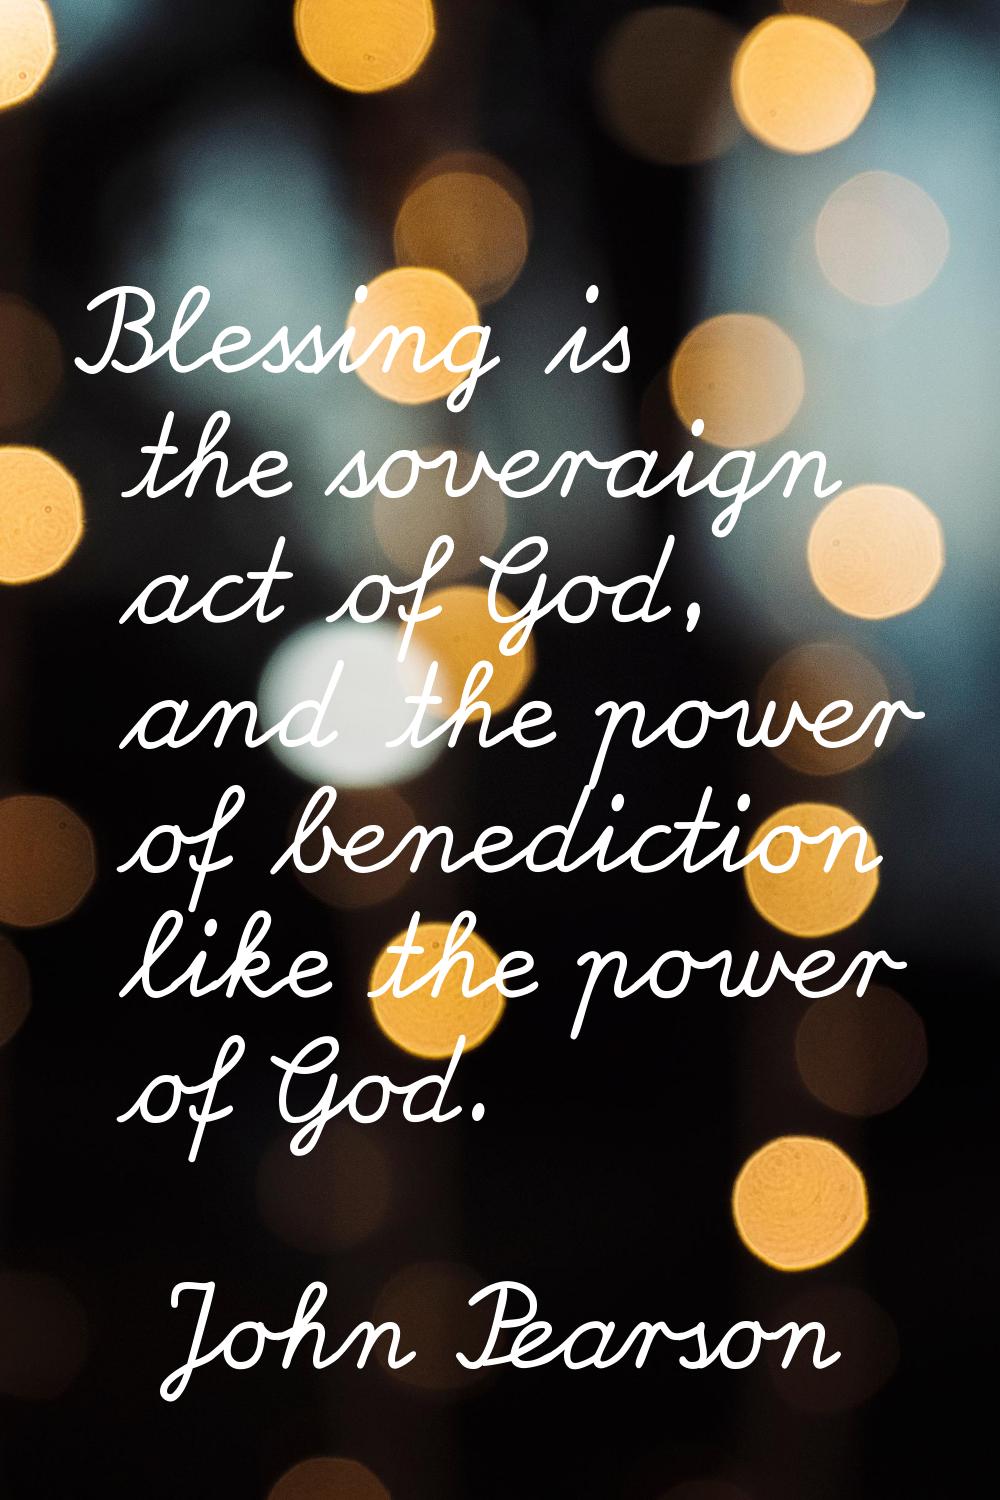 Blessing is the soveraign act of God, and the power of benediction like the power of God.